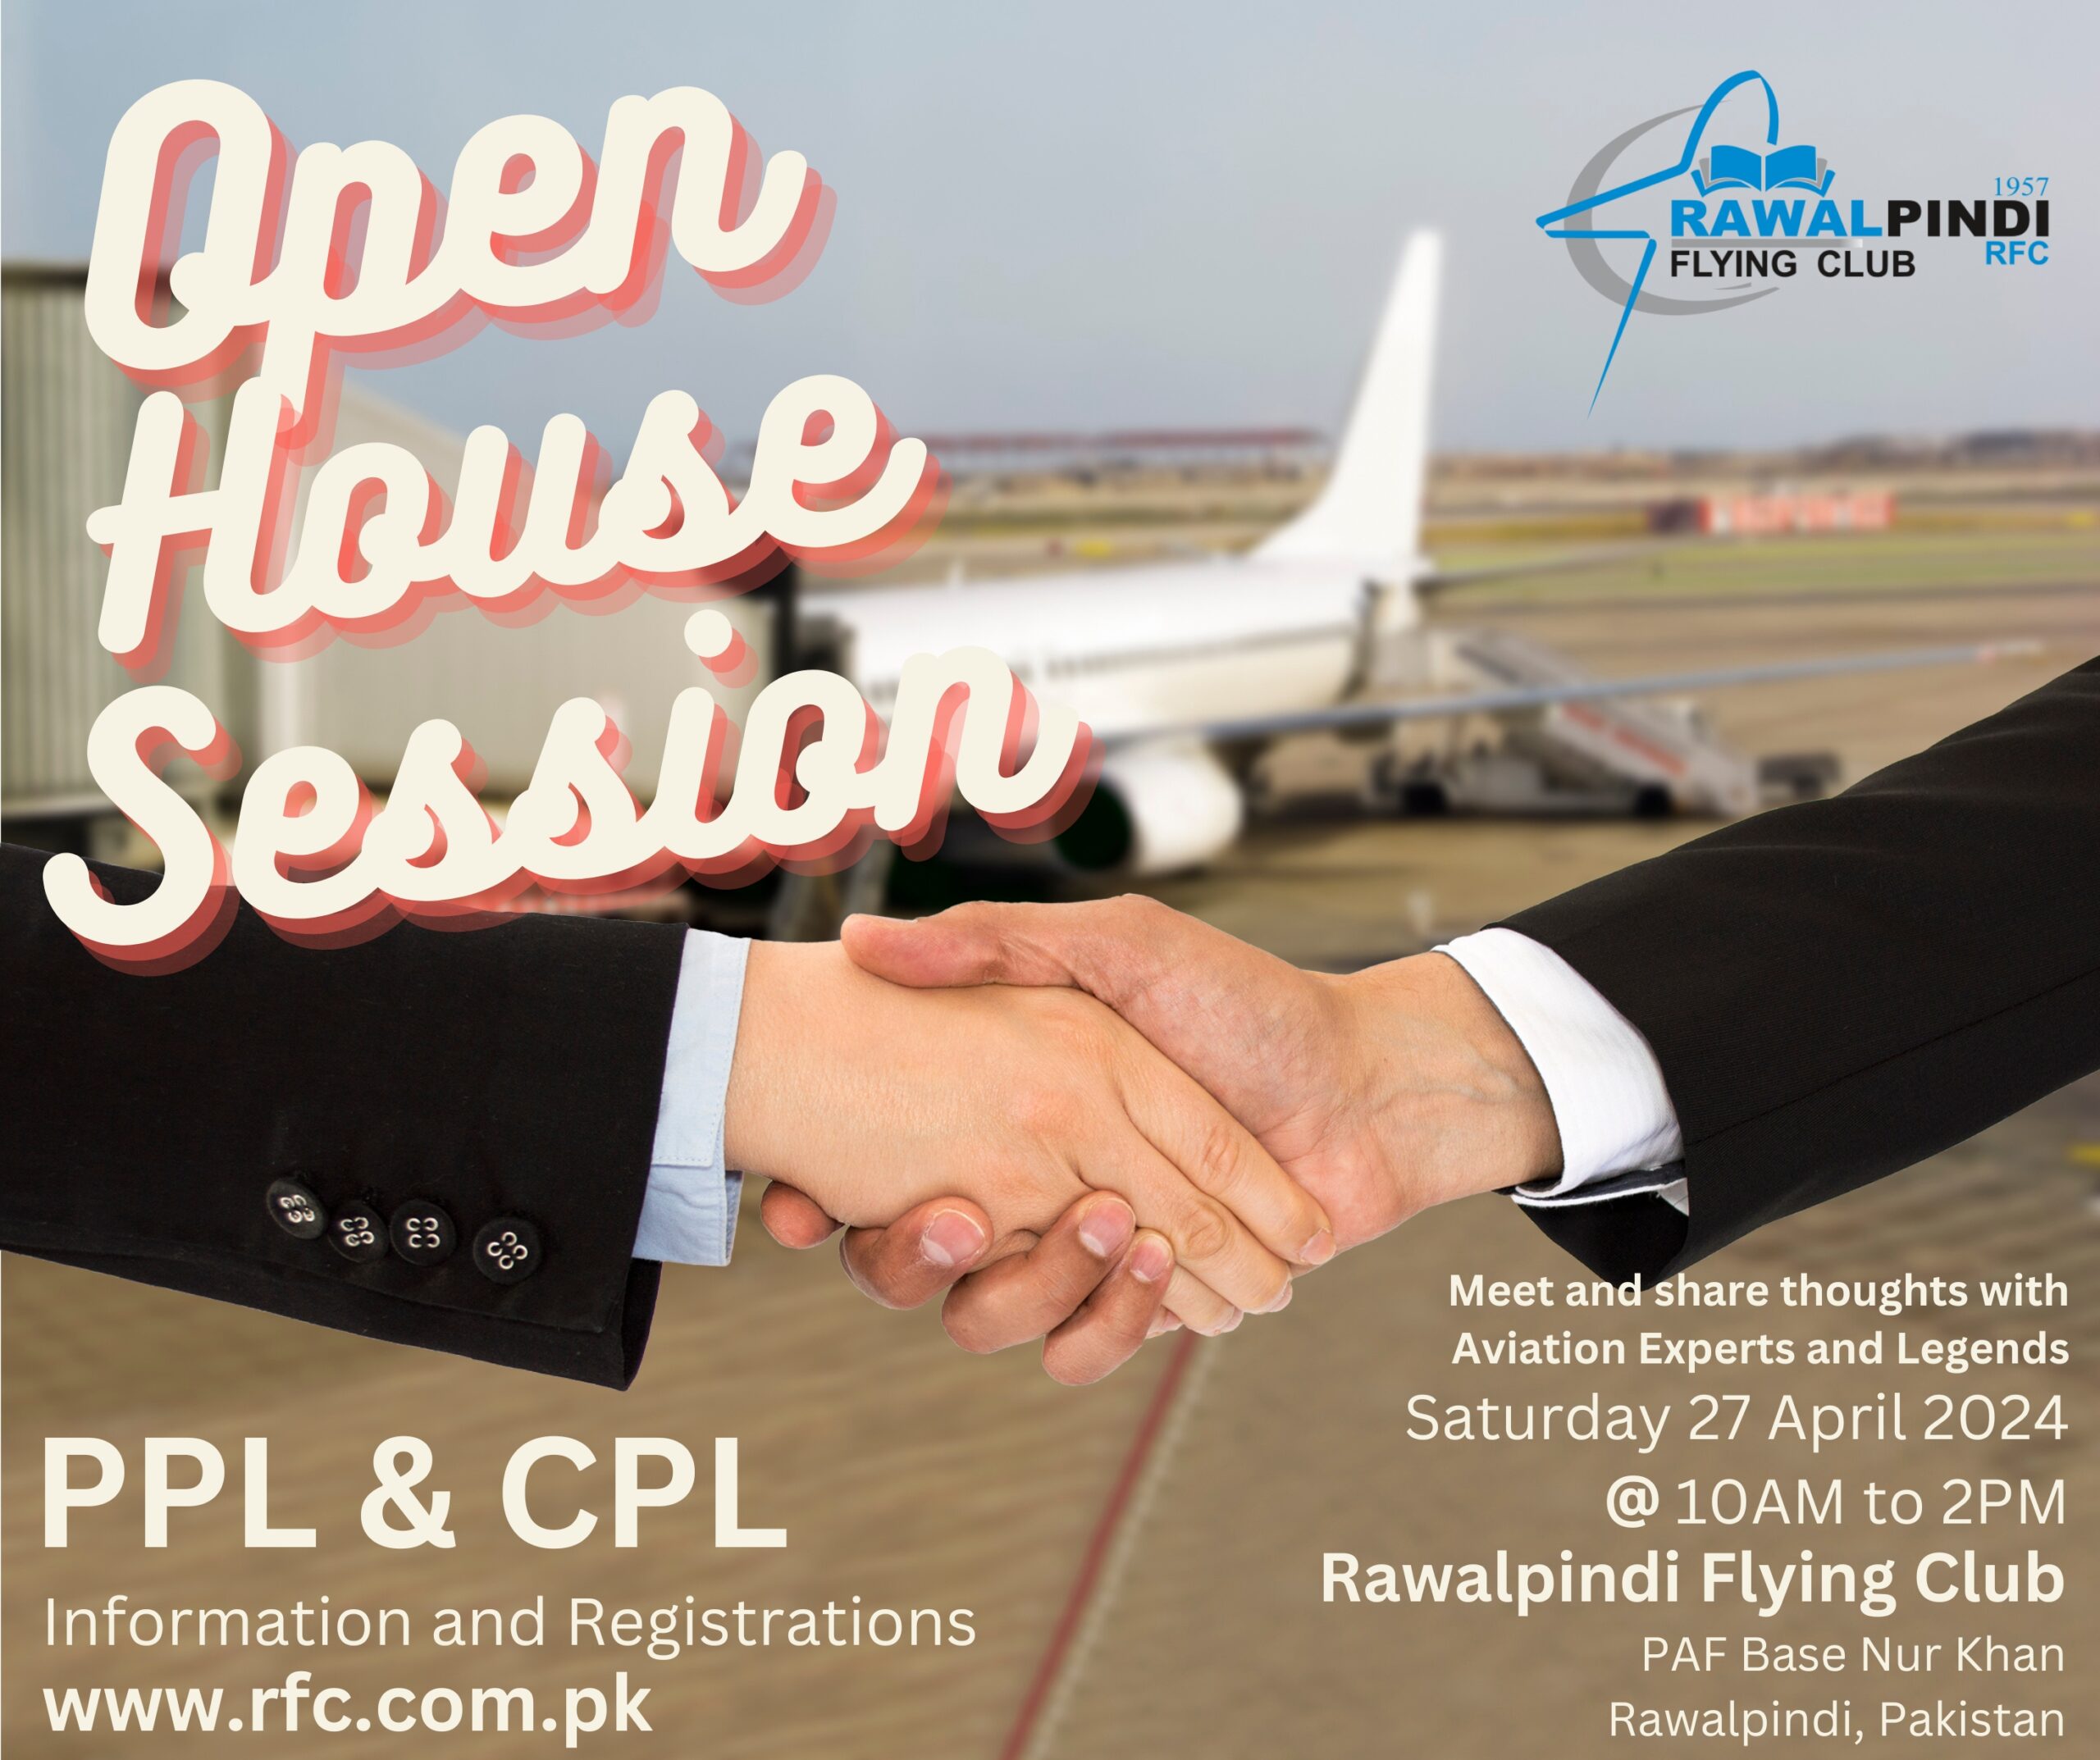 Dear Aviation Lovers: Rawalpindi Flying Club is pleased to invite all Aviation Enthusiasts and their families for an Open House Session on Saturday 27 April 2024 from 10:00 AM to 02:00 PM. Following are the key activities planned. • Information & Registrations for batches of CPL & PPL • Introductory Circuit Flying Lessons on Flight Simulator • Demonstration of Digital Flight Planning and Operations Control • Live ATC of Airport Traffic • Model Aircraft Display, Orientation and Simulator • Seminar on Future Prospects of Aviation in Pakistan • Networking, Meet and Greet Opportunity with Qualified Flight Instructors, Students, Alumni, Airline Pilots, Aeromodellors and Model Aircraft Builders. Venue: Academic Building of Rawalpindi Flying Club PAF Base Nur Khan, Rawalpindi, Pakistan. Google Map Location: https://maps.app.goo.gl/fPwwUbpq4w6ACfax8 Regards Management Rawalpindi Flying Club www.rfc.com.pk